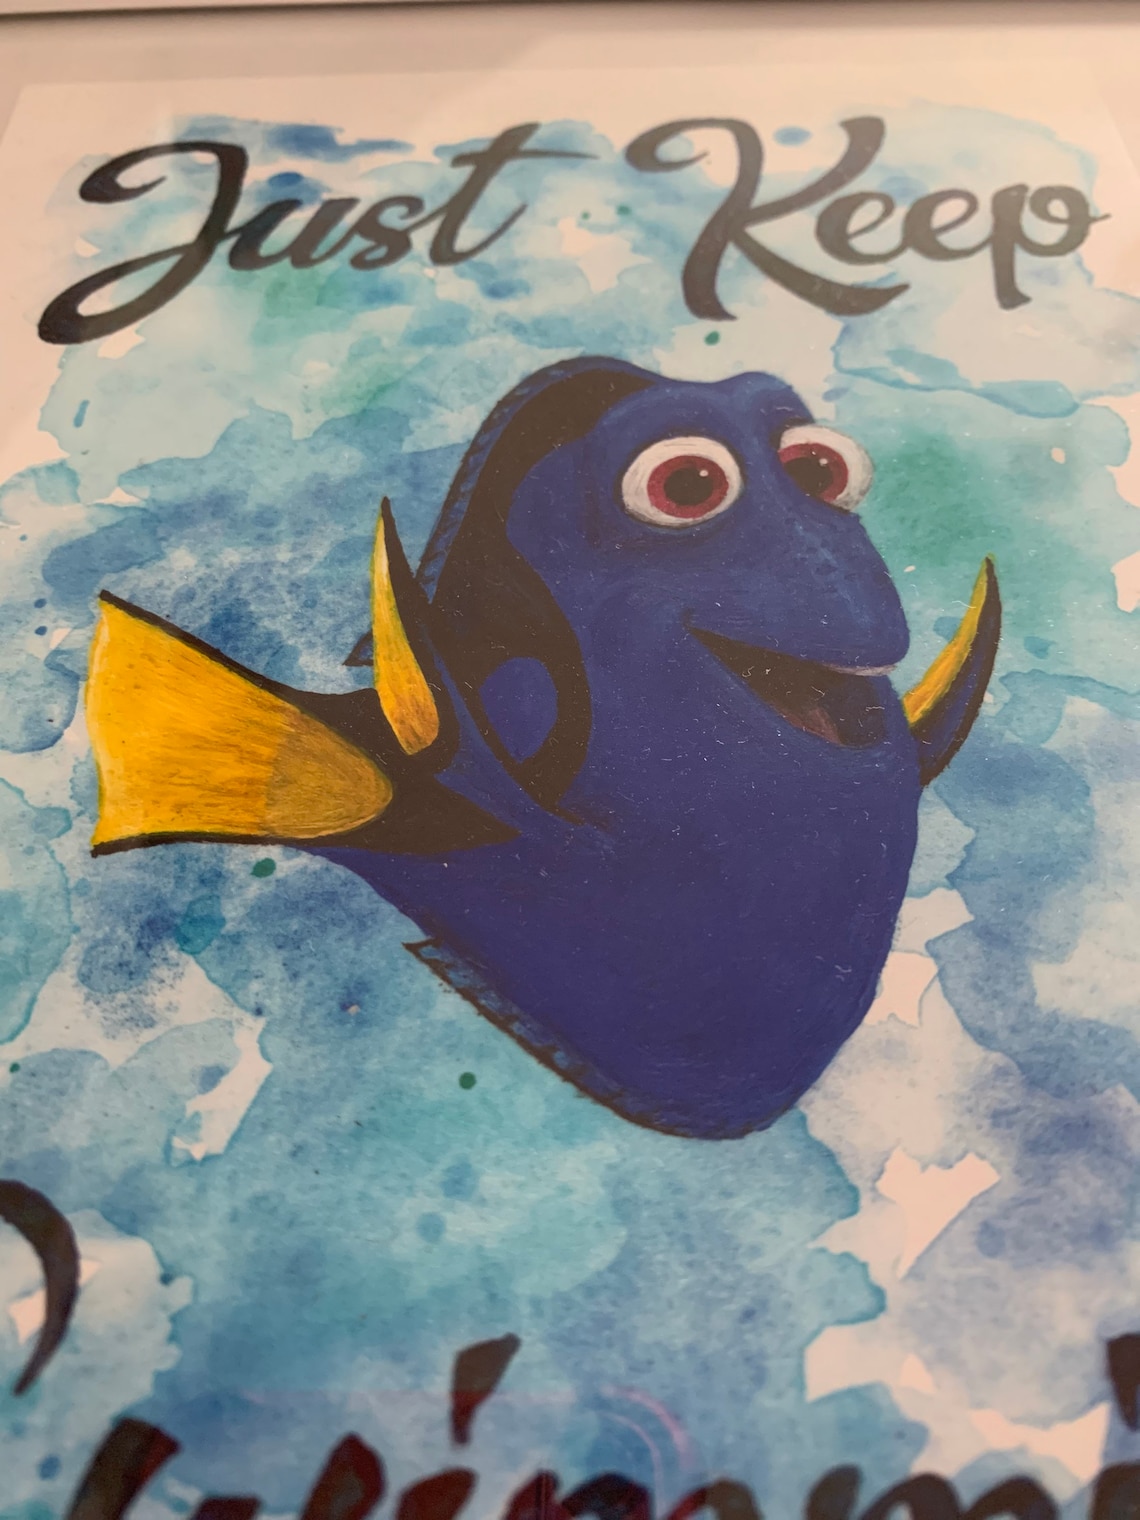 Finding nemo font just keep swimming - photobooy